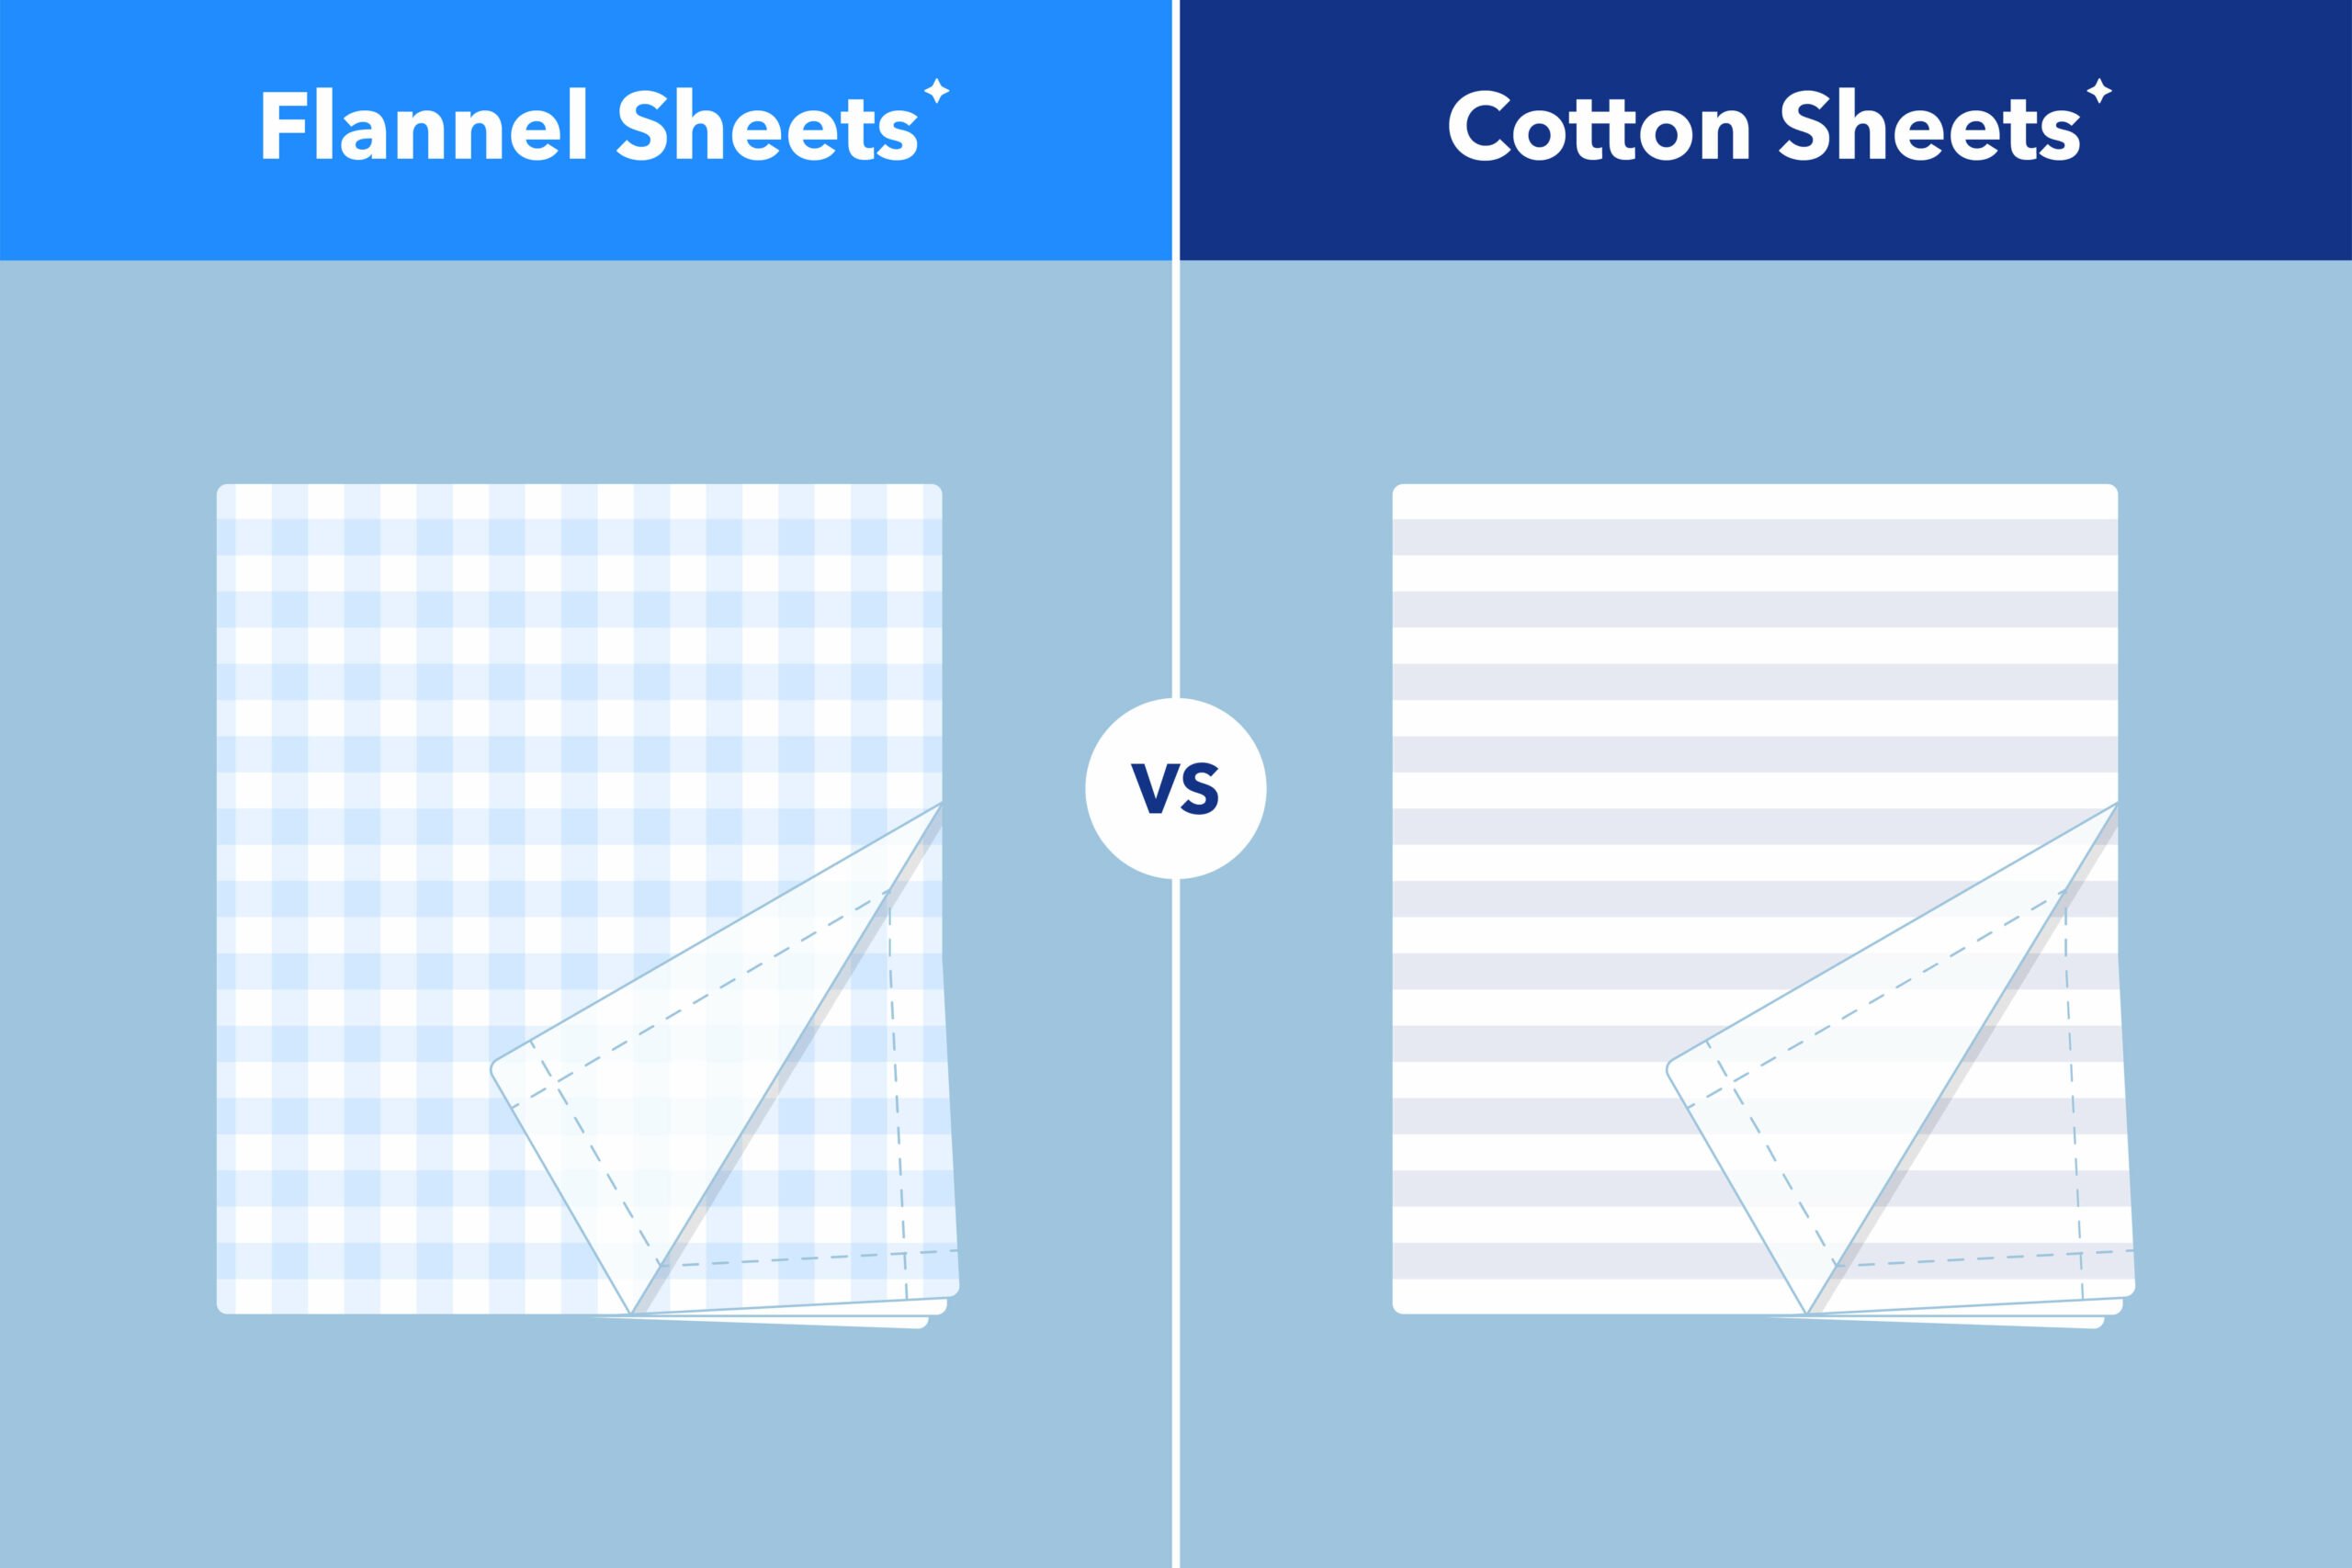 Flannel vs Cotton Sheets: What’s the Difference?